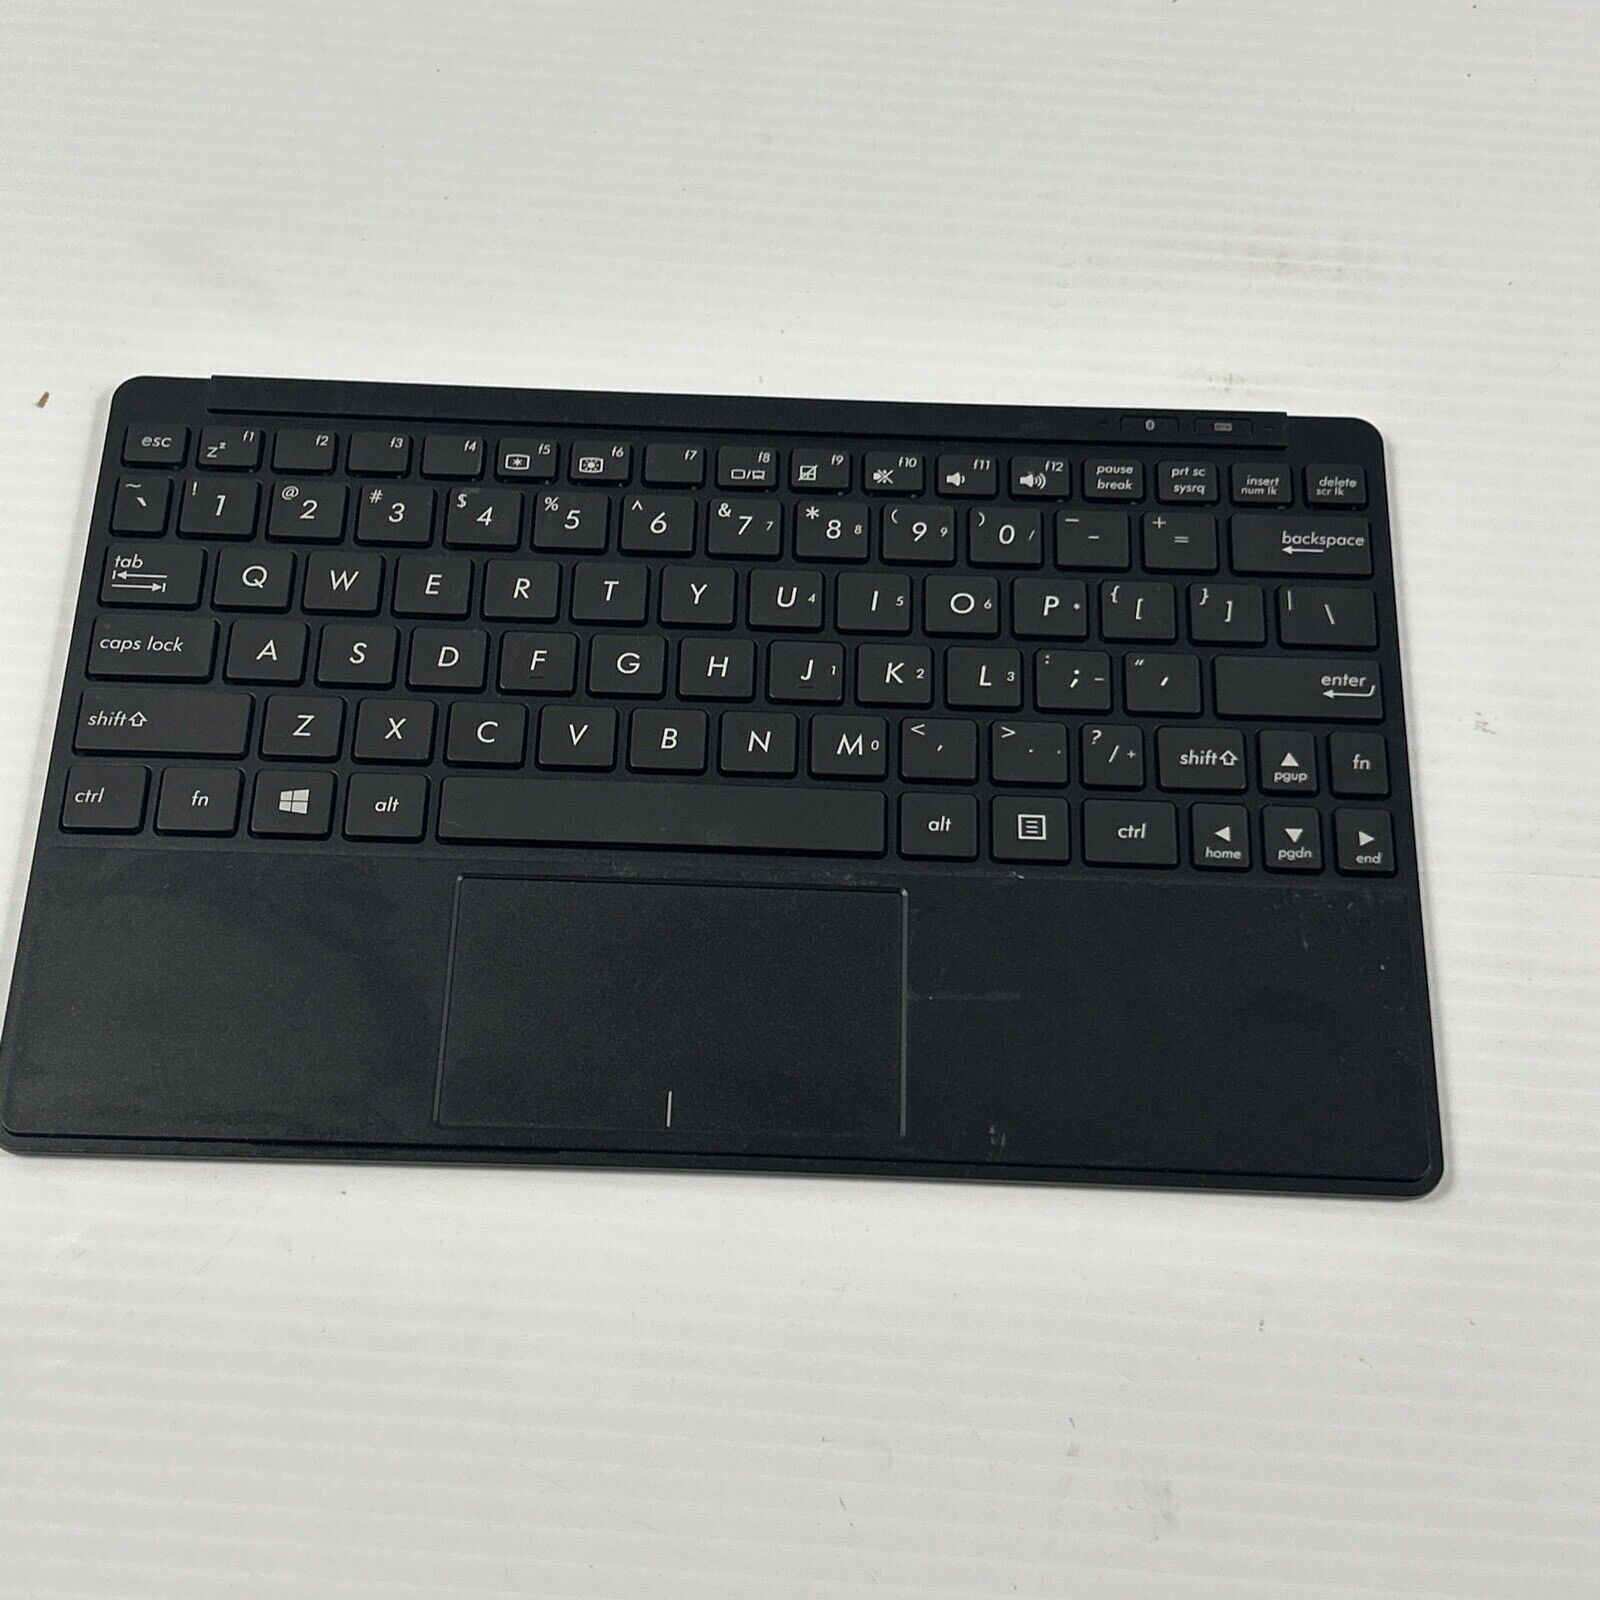 ASUS Keyboard Touchpad & Transleeve Cover for VivoTab Smart ME400 Series